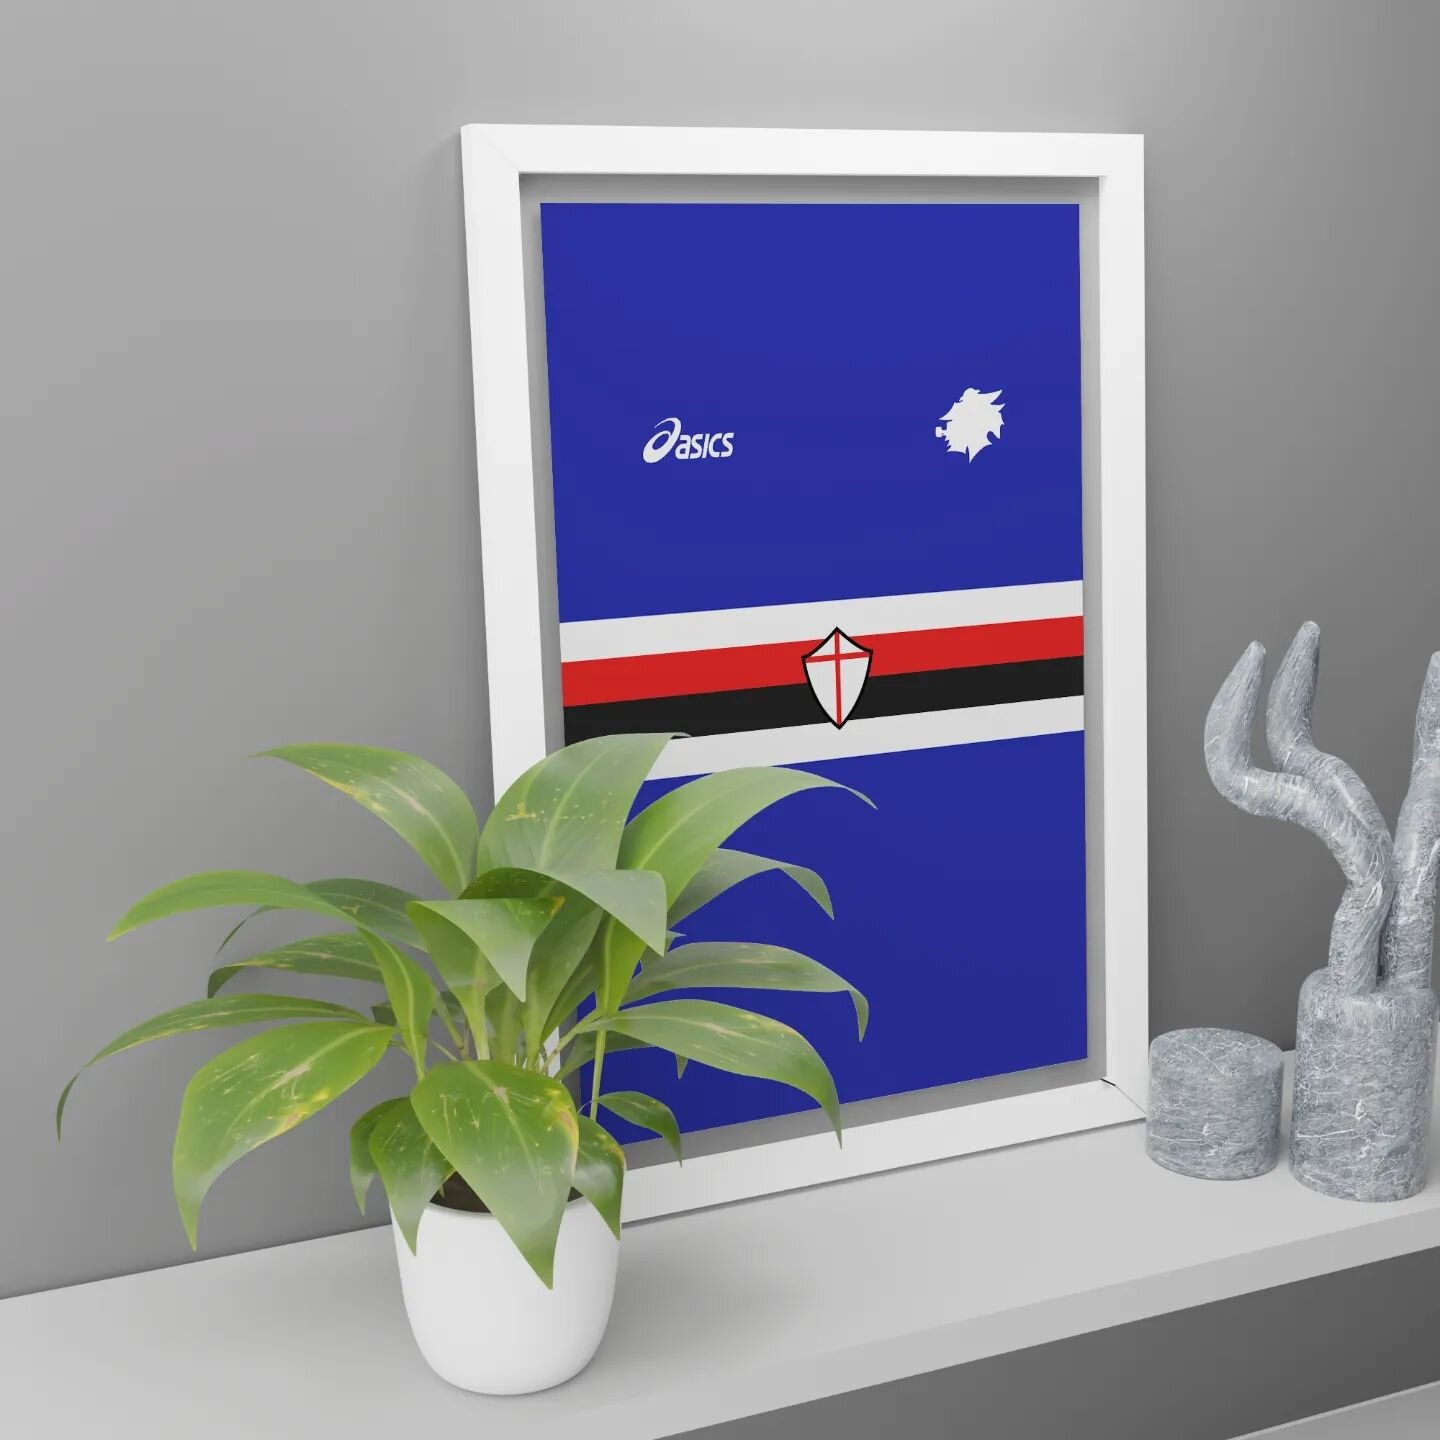 New print just launched! Link in bio 👊⚽

The all time classic Sampdoria home shirt from the 96-97 season turned into wall art to brighten up homes everywhere!

#footballprint #footballart #wallart #footballgift #footballgifts #italianfootball #print